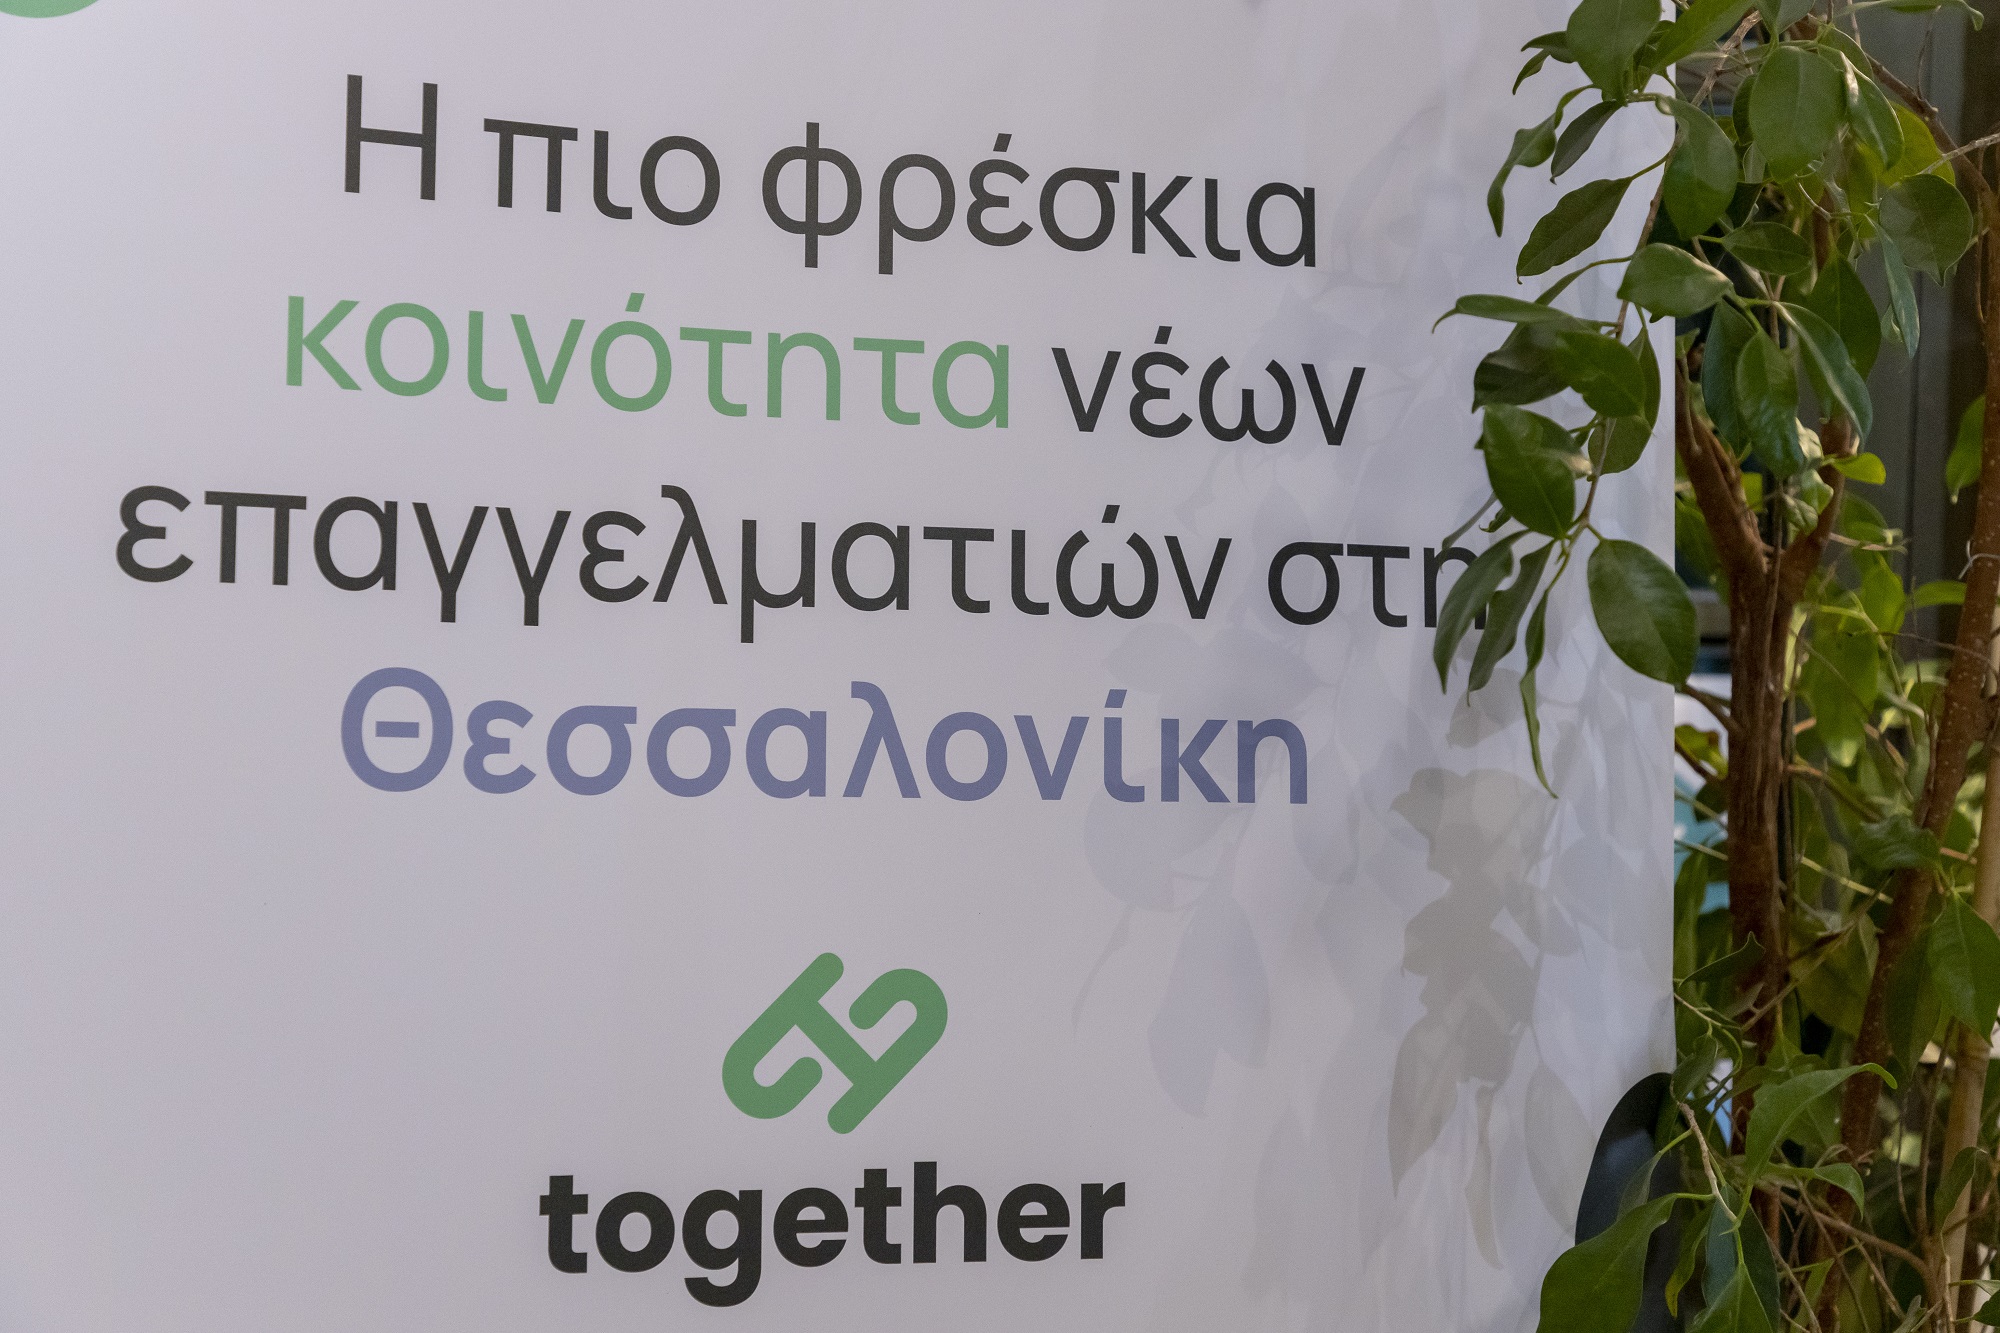 TITAN and Youthnest – “Together” program for the empowerment of 150 young people